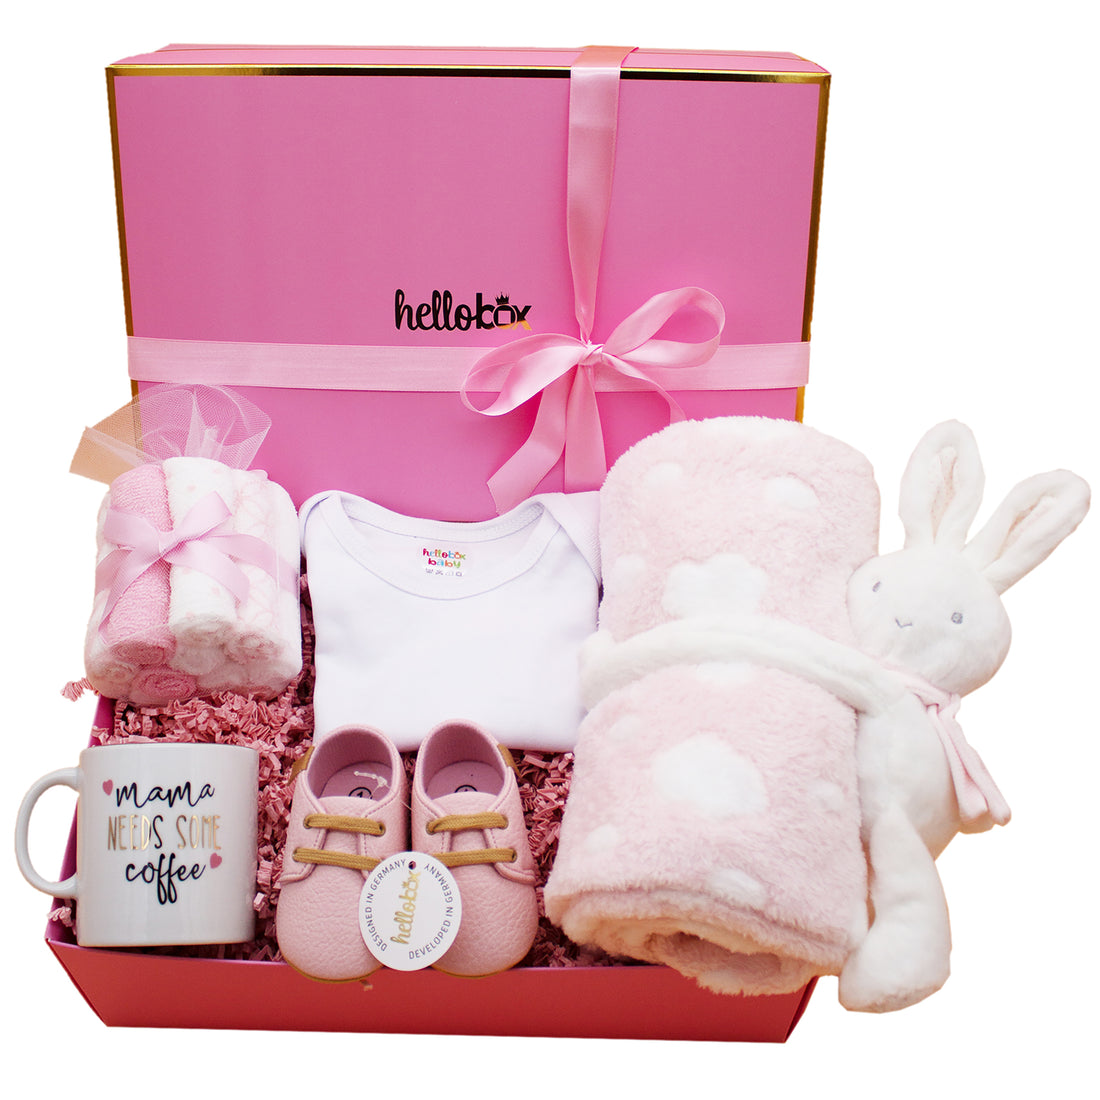 Celebrate Little Princesses with the Best French Baby Gifts for Girls from Helloboxshop.de